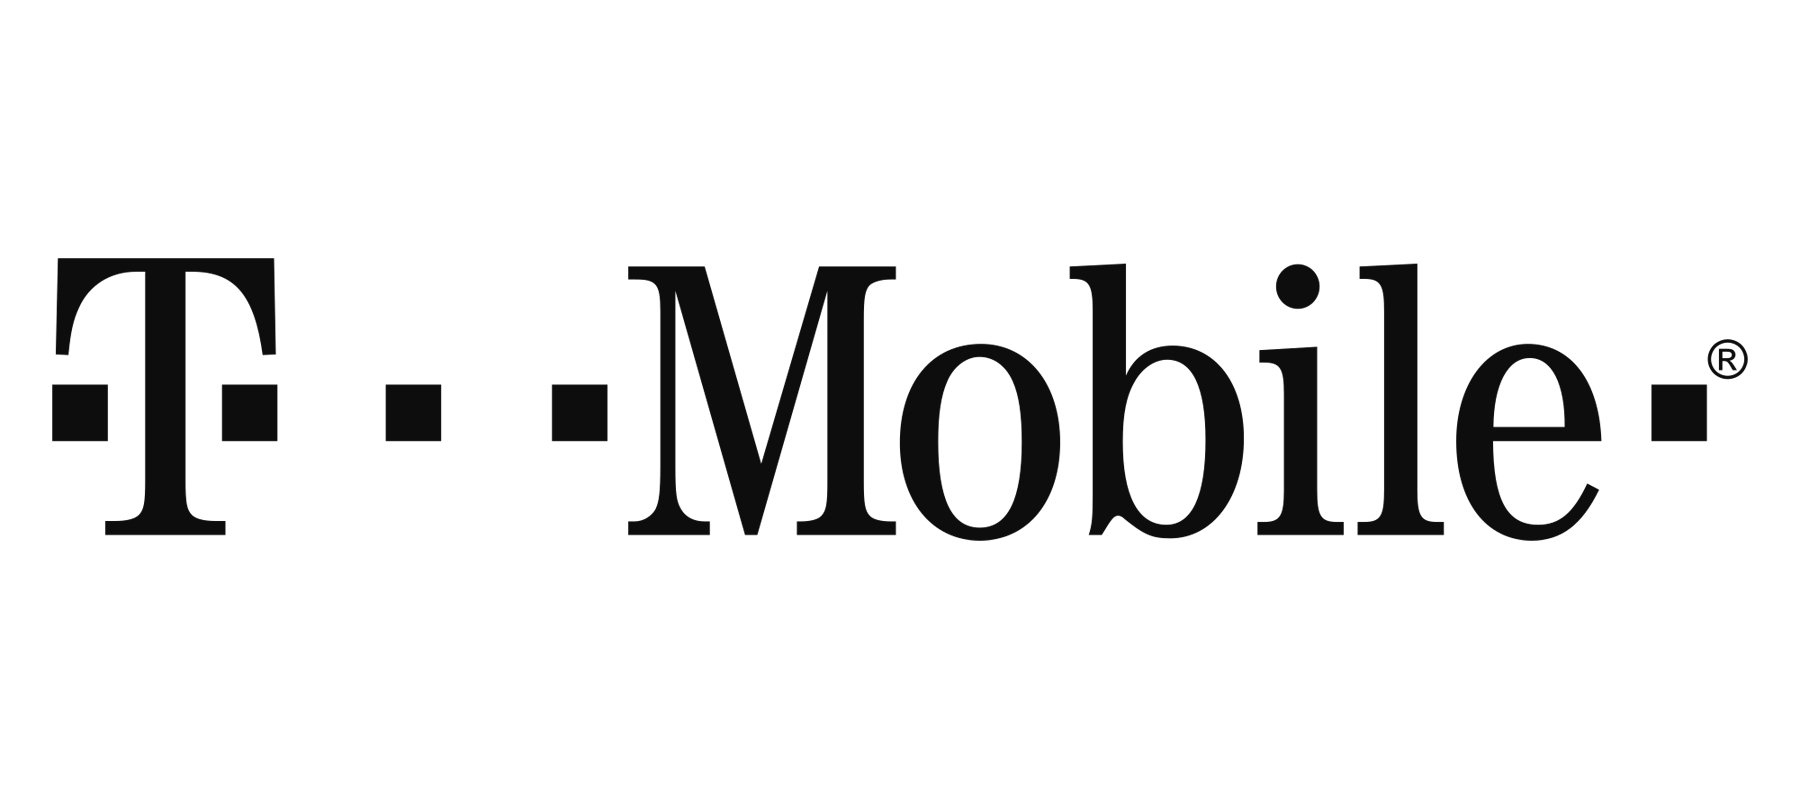 T-Mobile Logo, T-Mobile Symbol, Meaning, History and Evolution